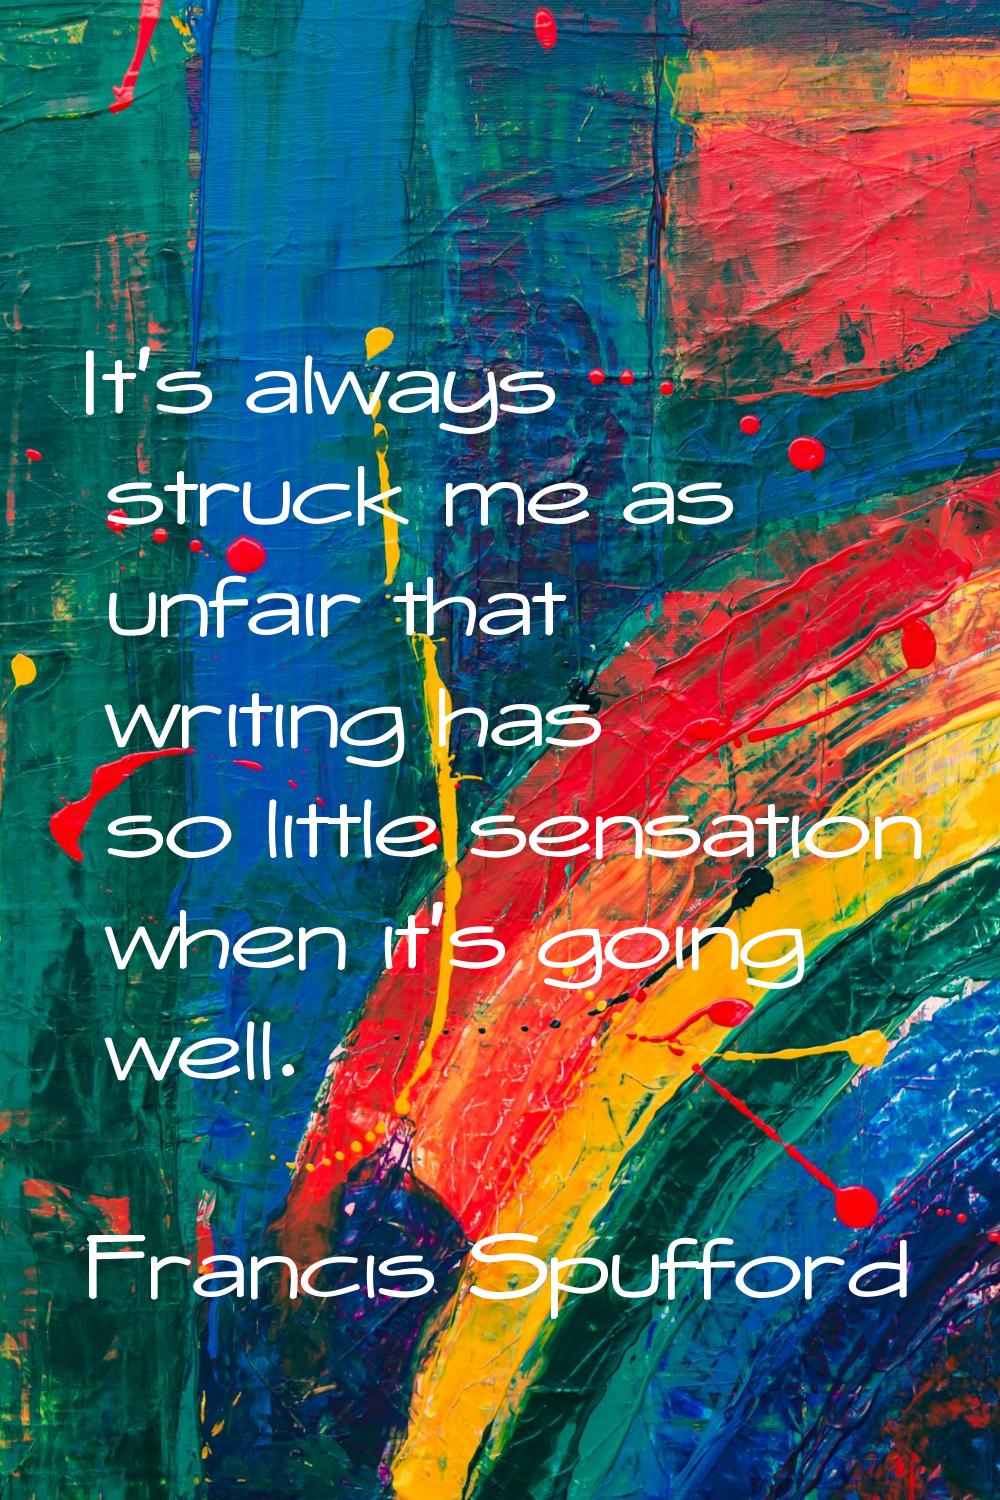 It's always struck me as unfair that writing has so little sensation when it's going well.